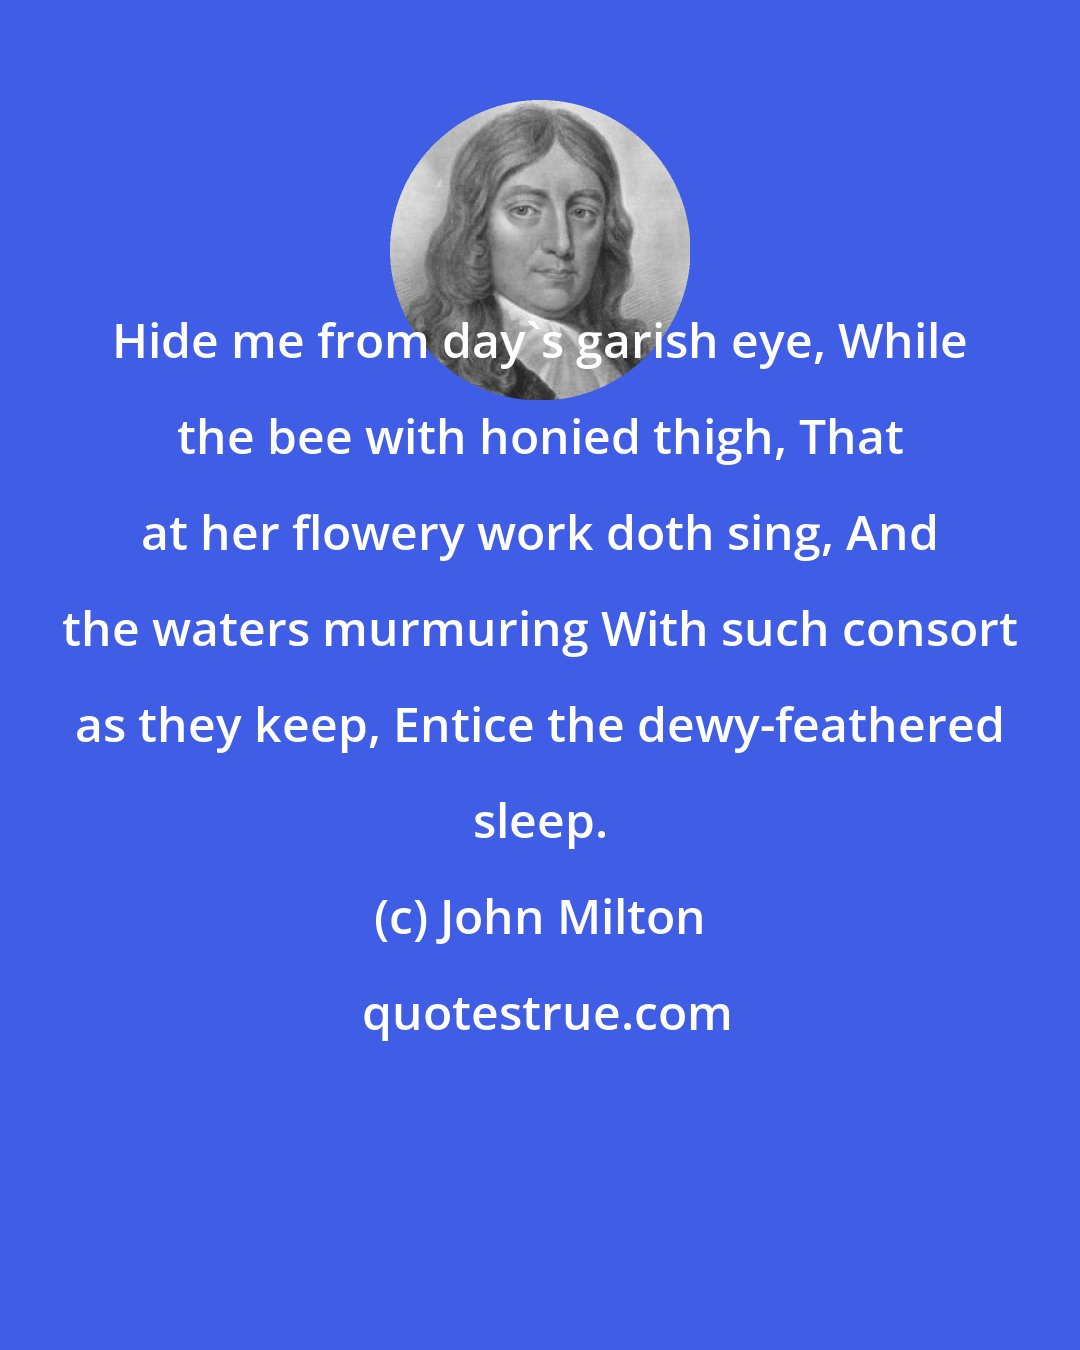 John Milton: Hide me from day's garish eye, While the bee with honied thigh, That at her flowery work doth sing, And the waters murmuring With such consort as they keep, Entice the dewy-feathered sleep.